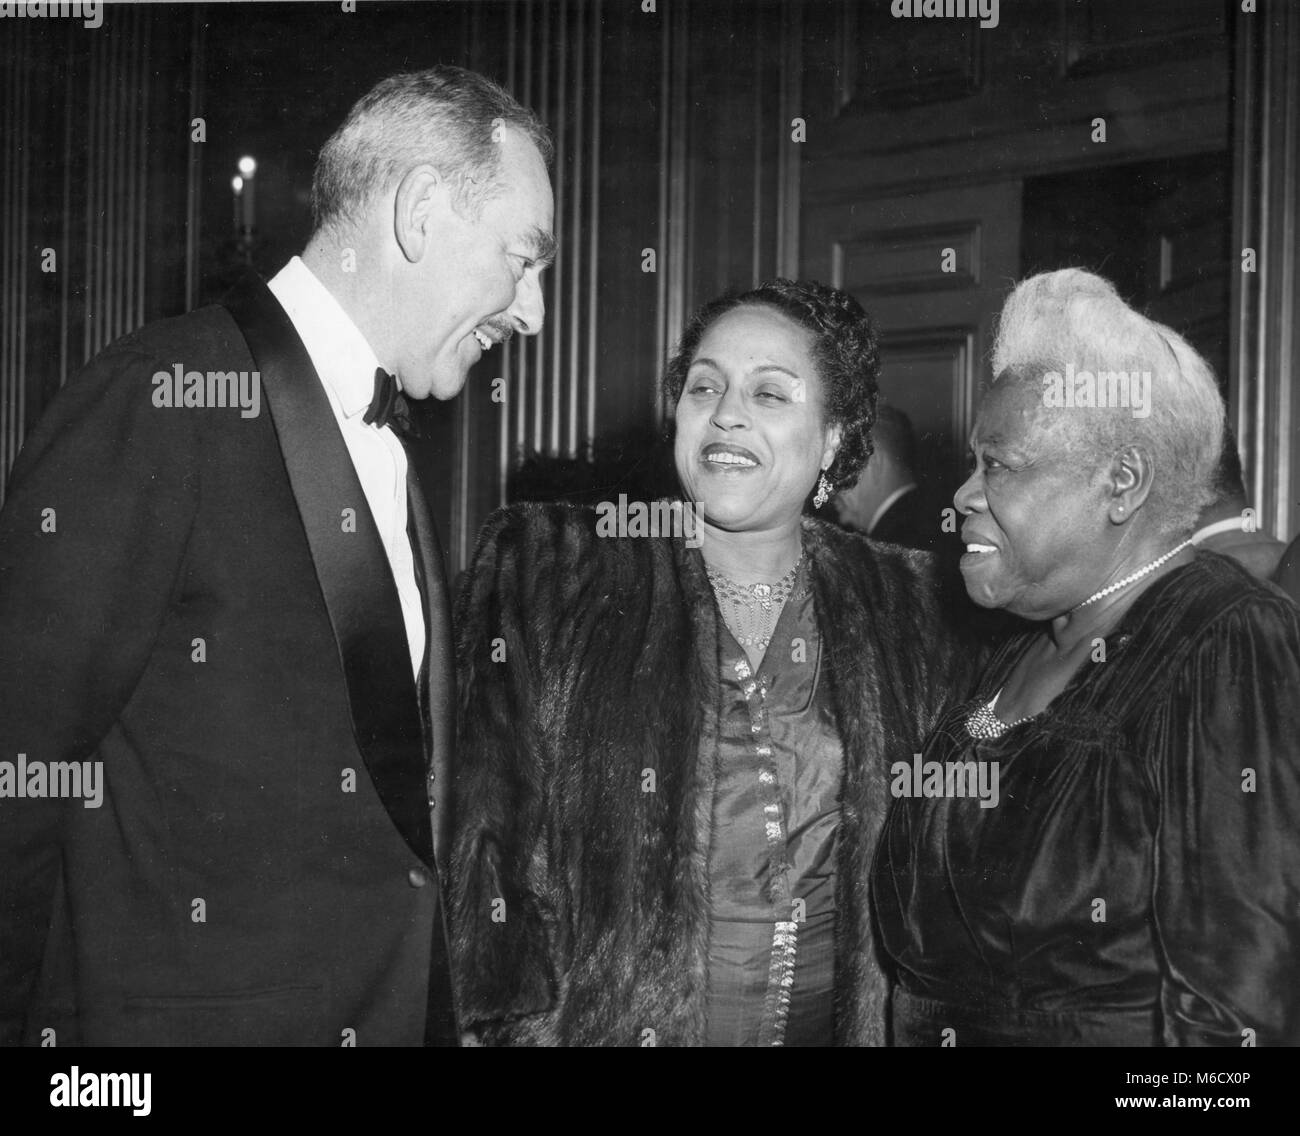 Secretary of State Dean Acheson (left) is shown at the 15th annual convention of the National Council of Negro Women, talking to Mrs. Edith S. Sampson (center) and Mary McLeod Bethune, founder of the Council. Washington, DC, 11/50. Stock Photo